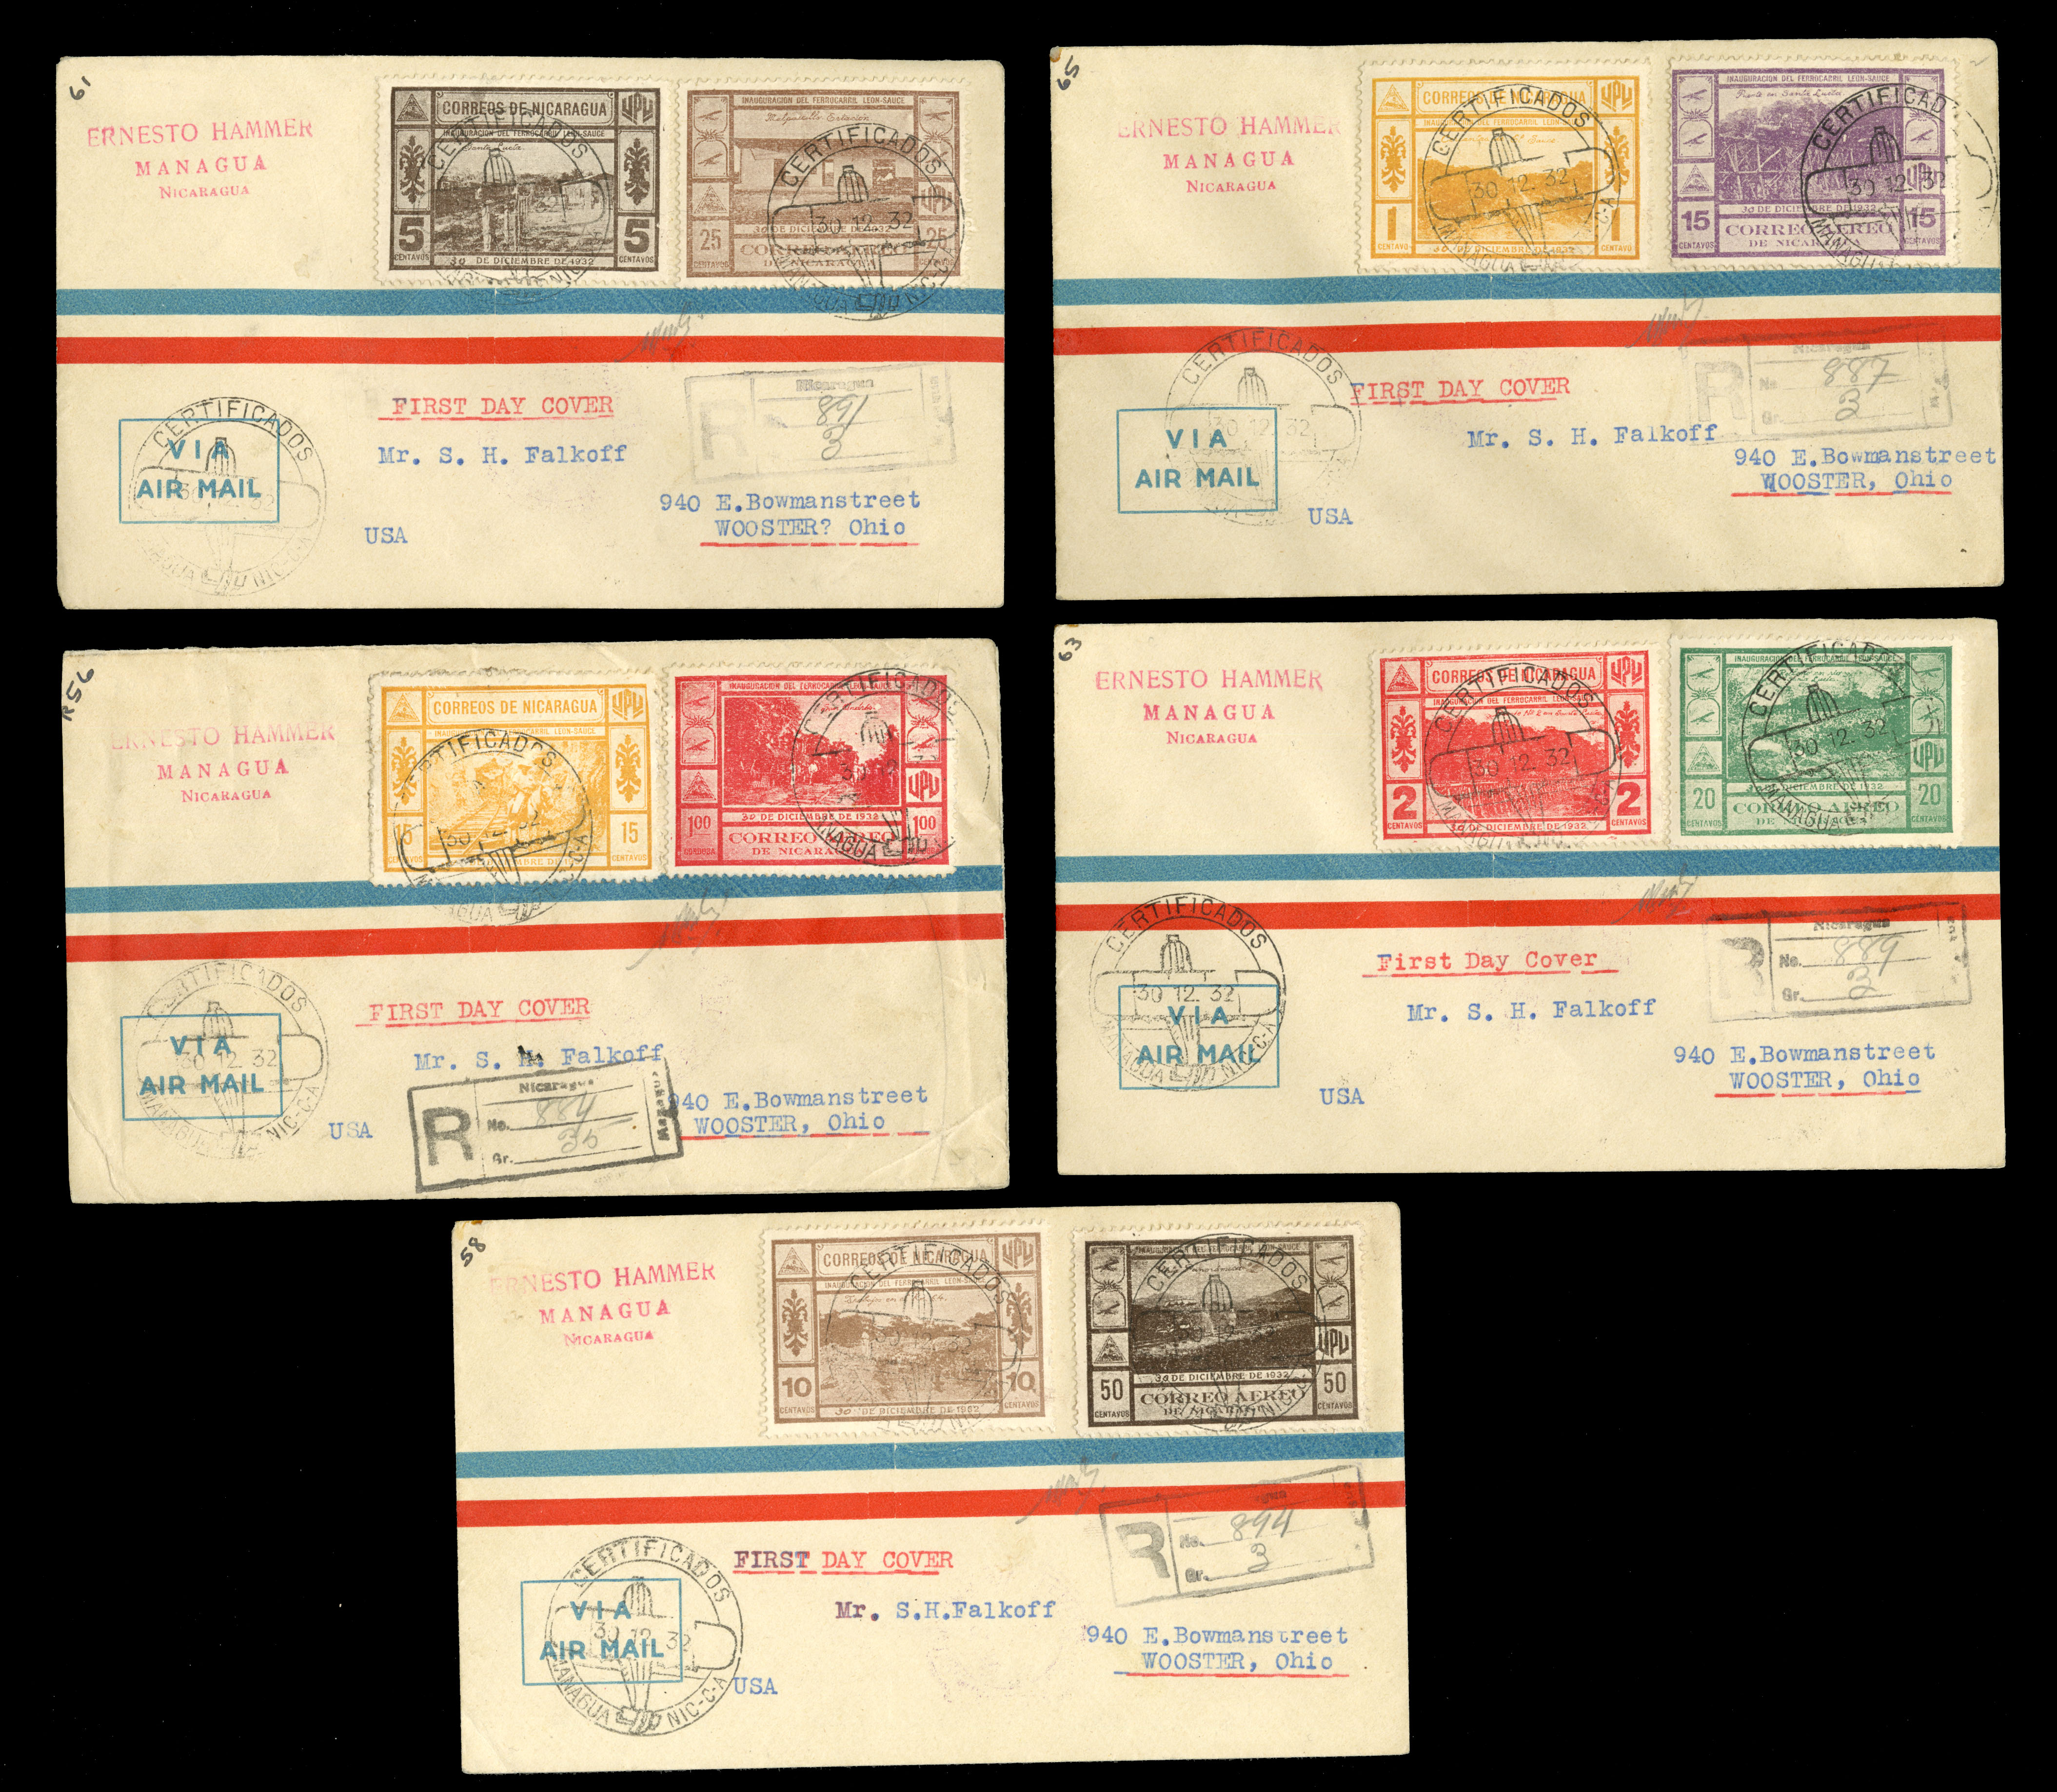 Lot 1128 - LARGE LOTS AND COLLECTIONS BRITISH COMMONWEALTH - Omnibus sets  -  Cherrystone Auctions U.S. & Worldwide Stamps & Postal History